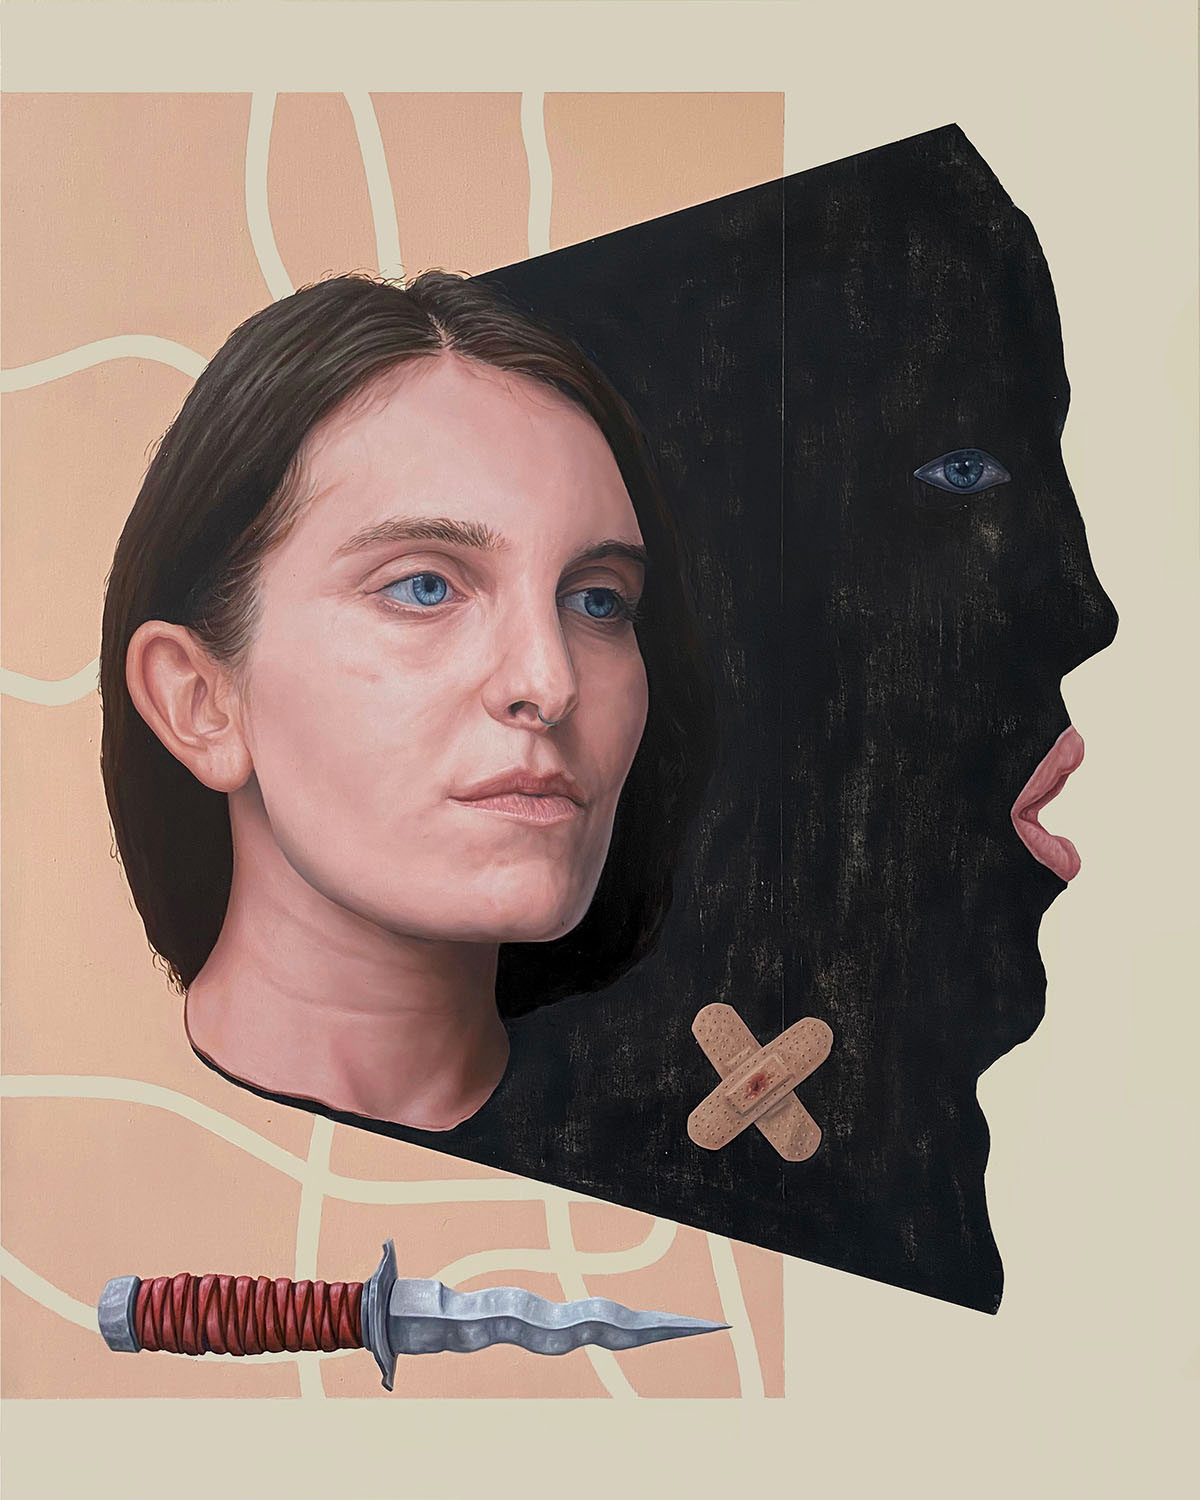 Sublime Paintings Of Introspective People By Cayl Austin (1)